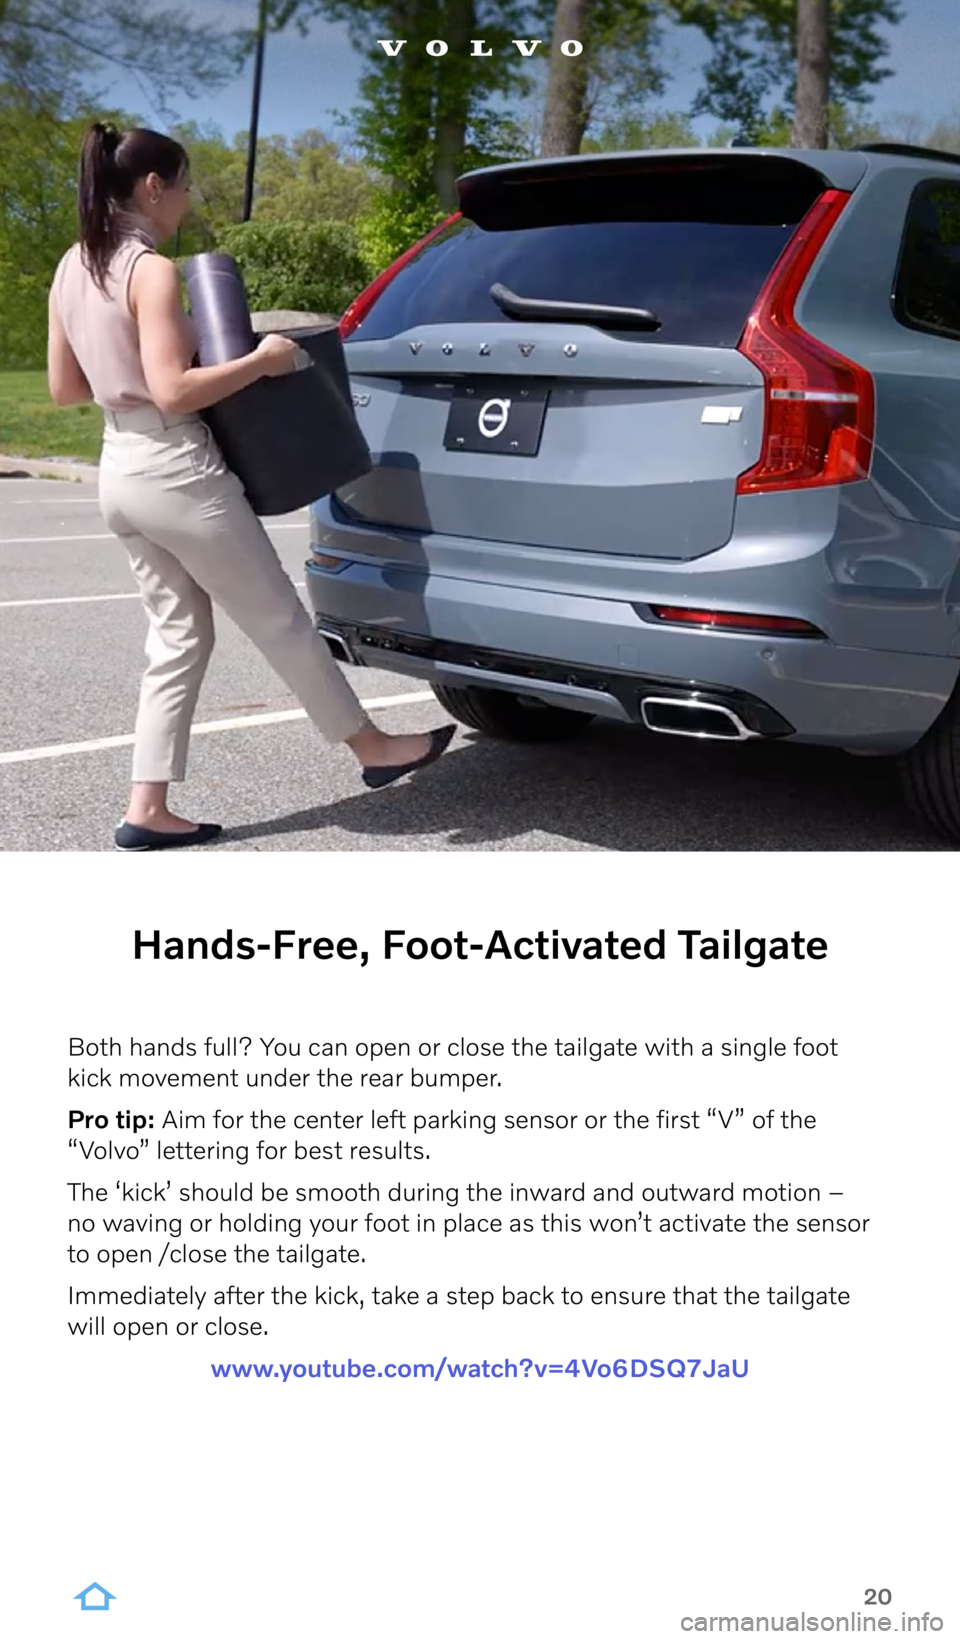 VOLVO C40 RECHARGE PURE ELECTRIC 2022  Google Digital Guide 20
Hands-Free, Foot-Activated Tailgate
Both hands full? You can open or close the tailgate with a single foot  
kick movement under the rear bumper.
Pro tip: Aim for the center left parking sensor or 